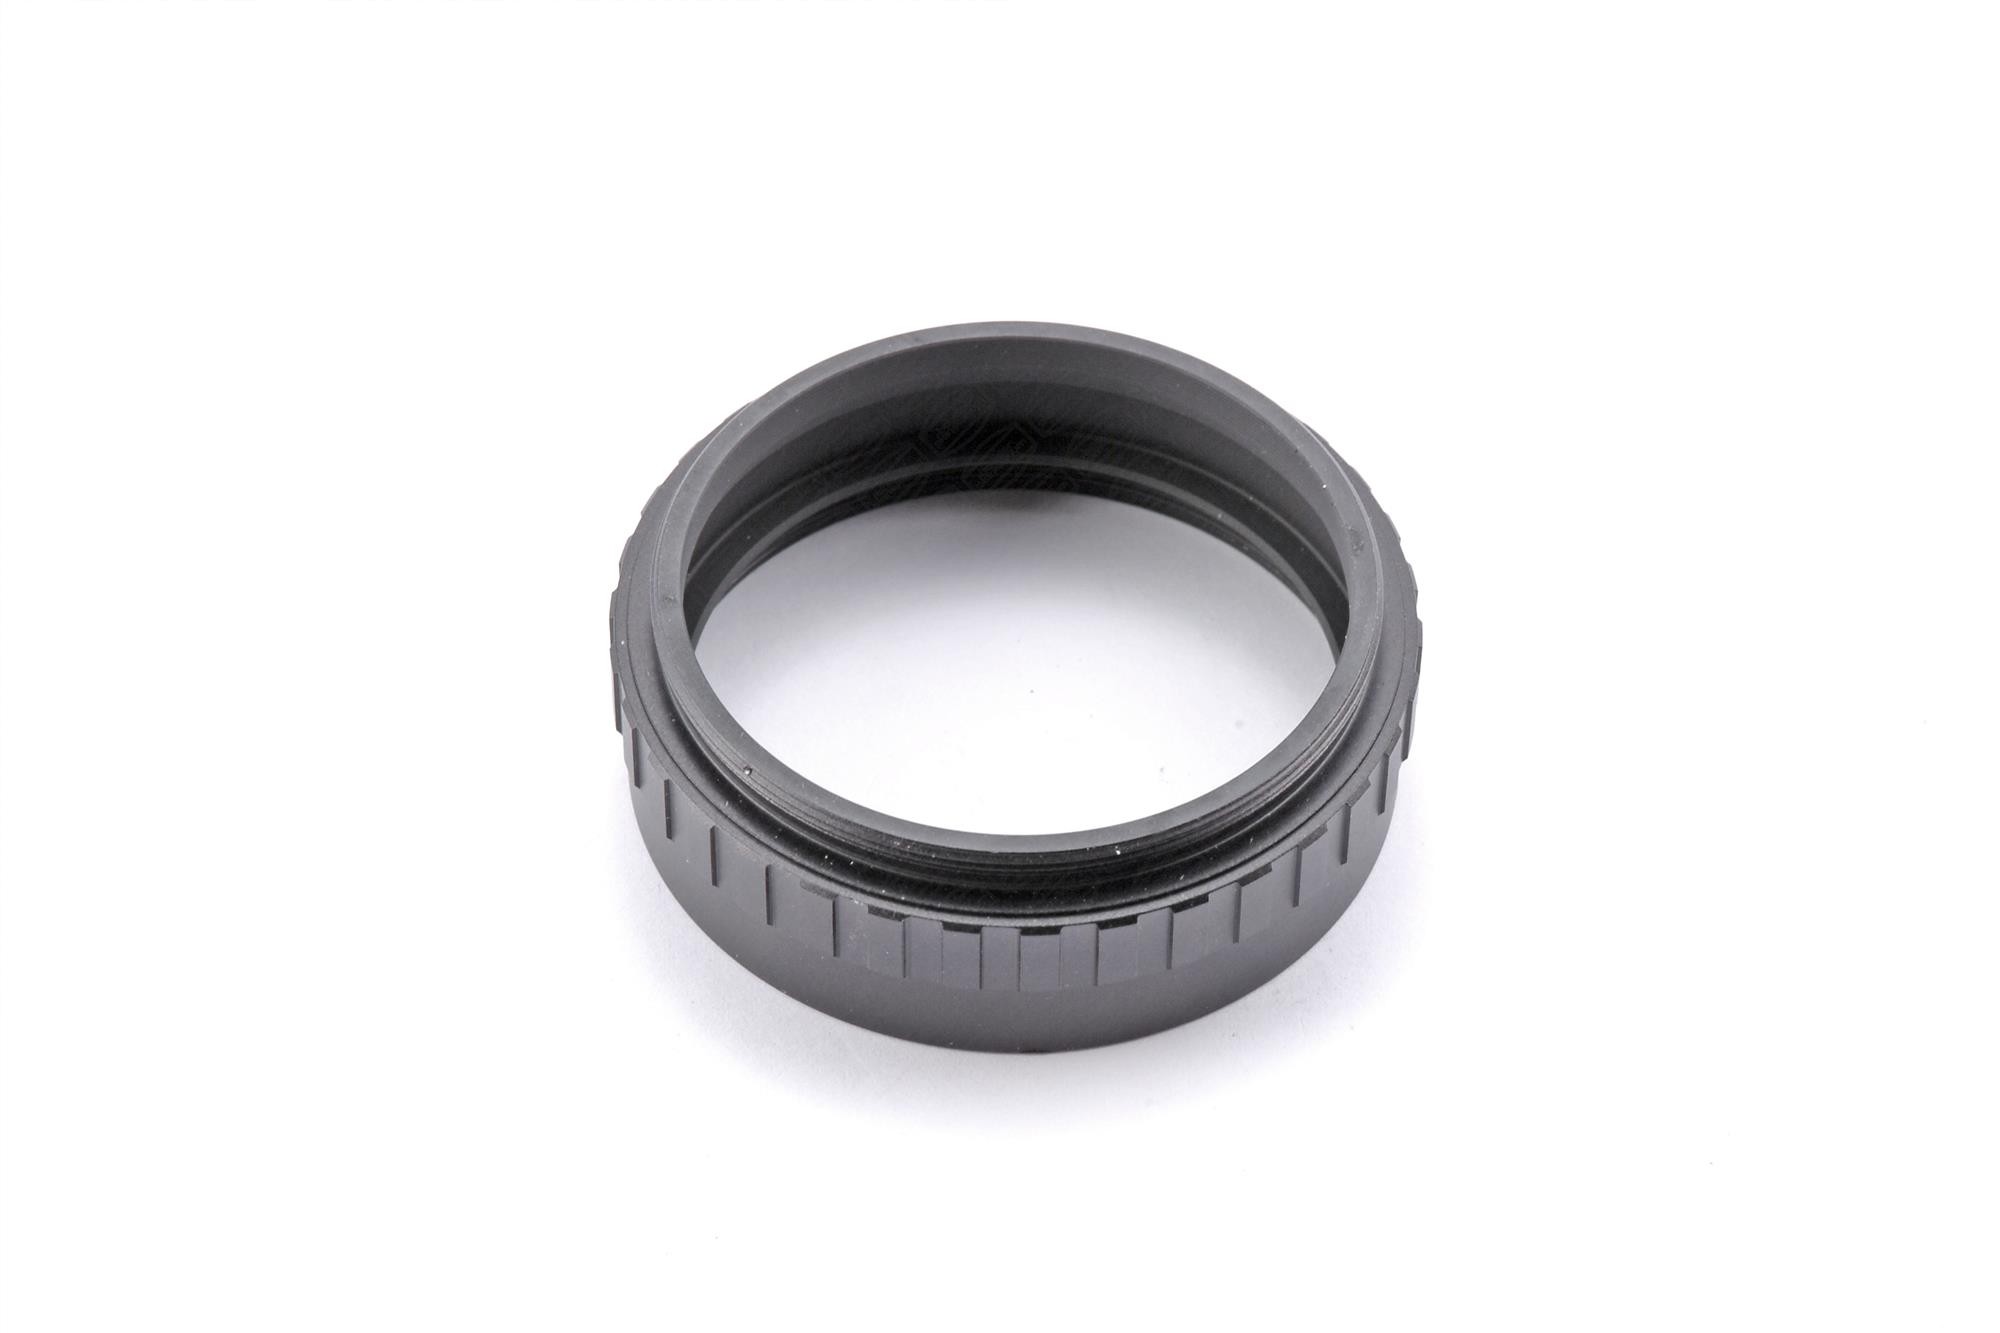 Baader M68 Extension tube 20mm